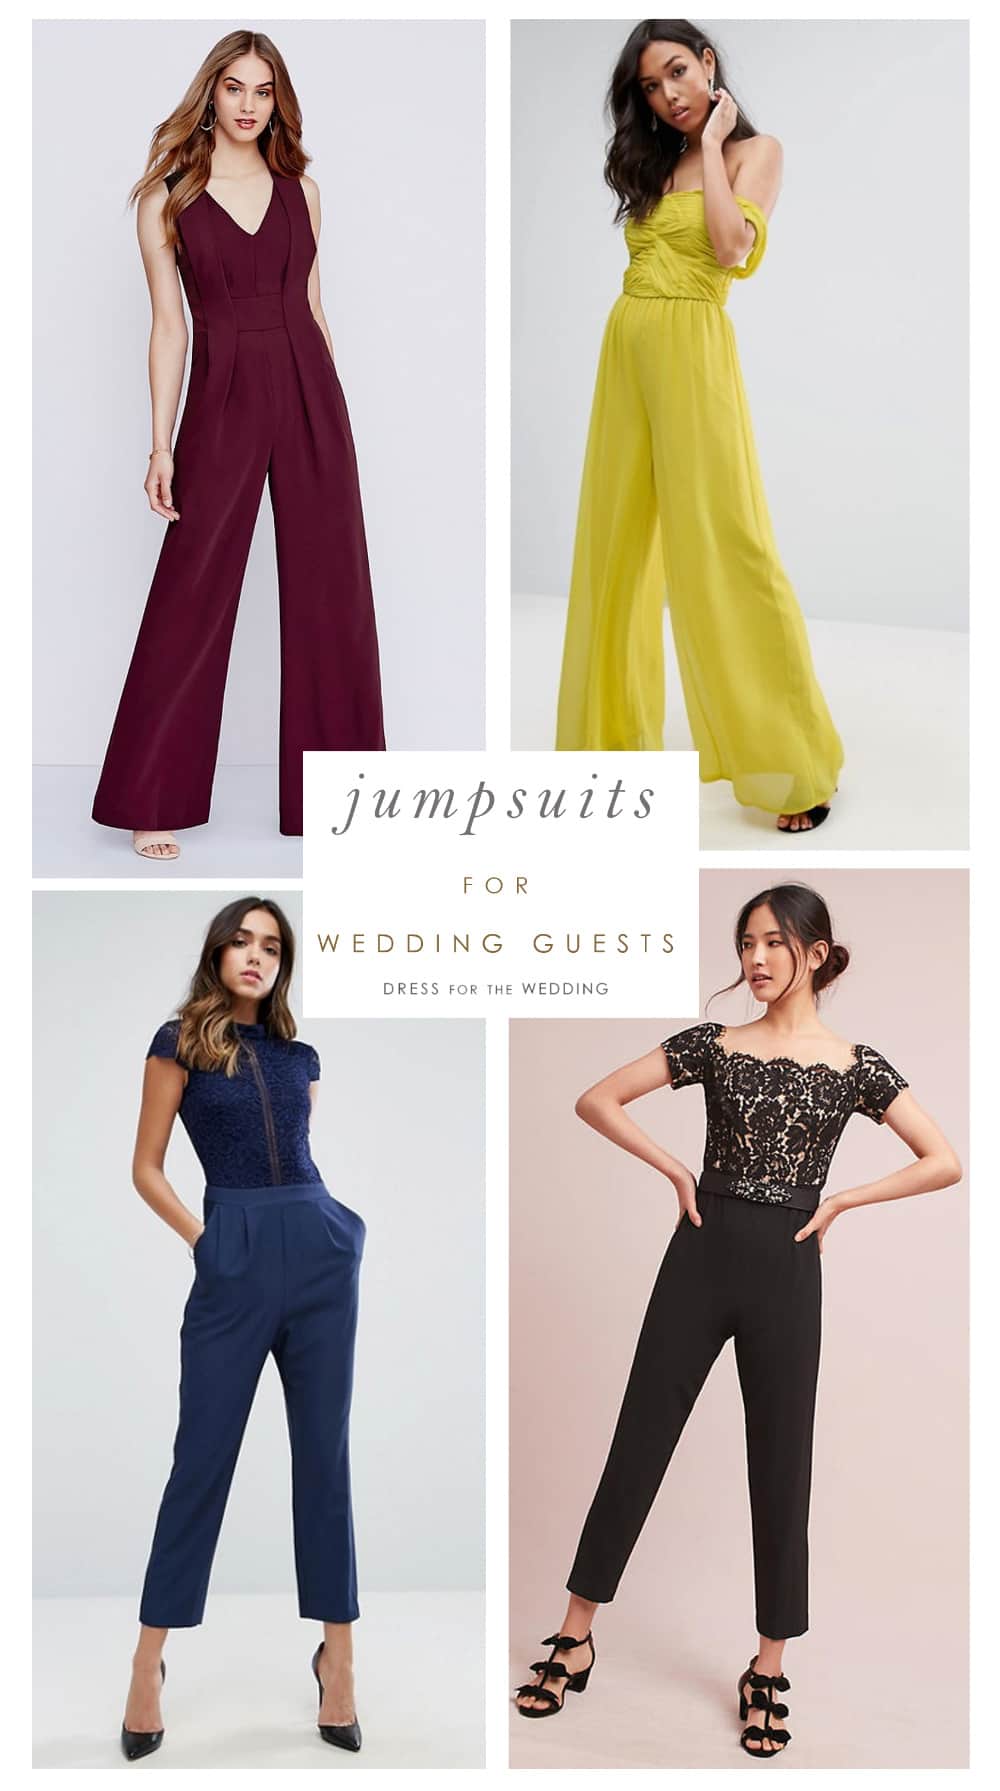 Jumpsuits for weddings: 35 best bridal and wedding jumpsuits